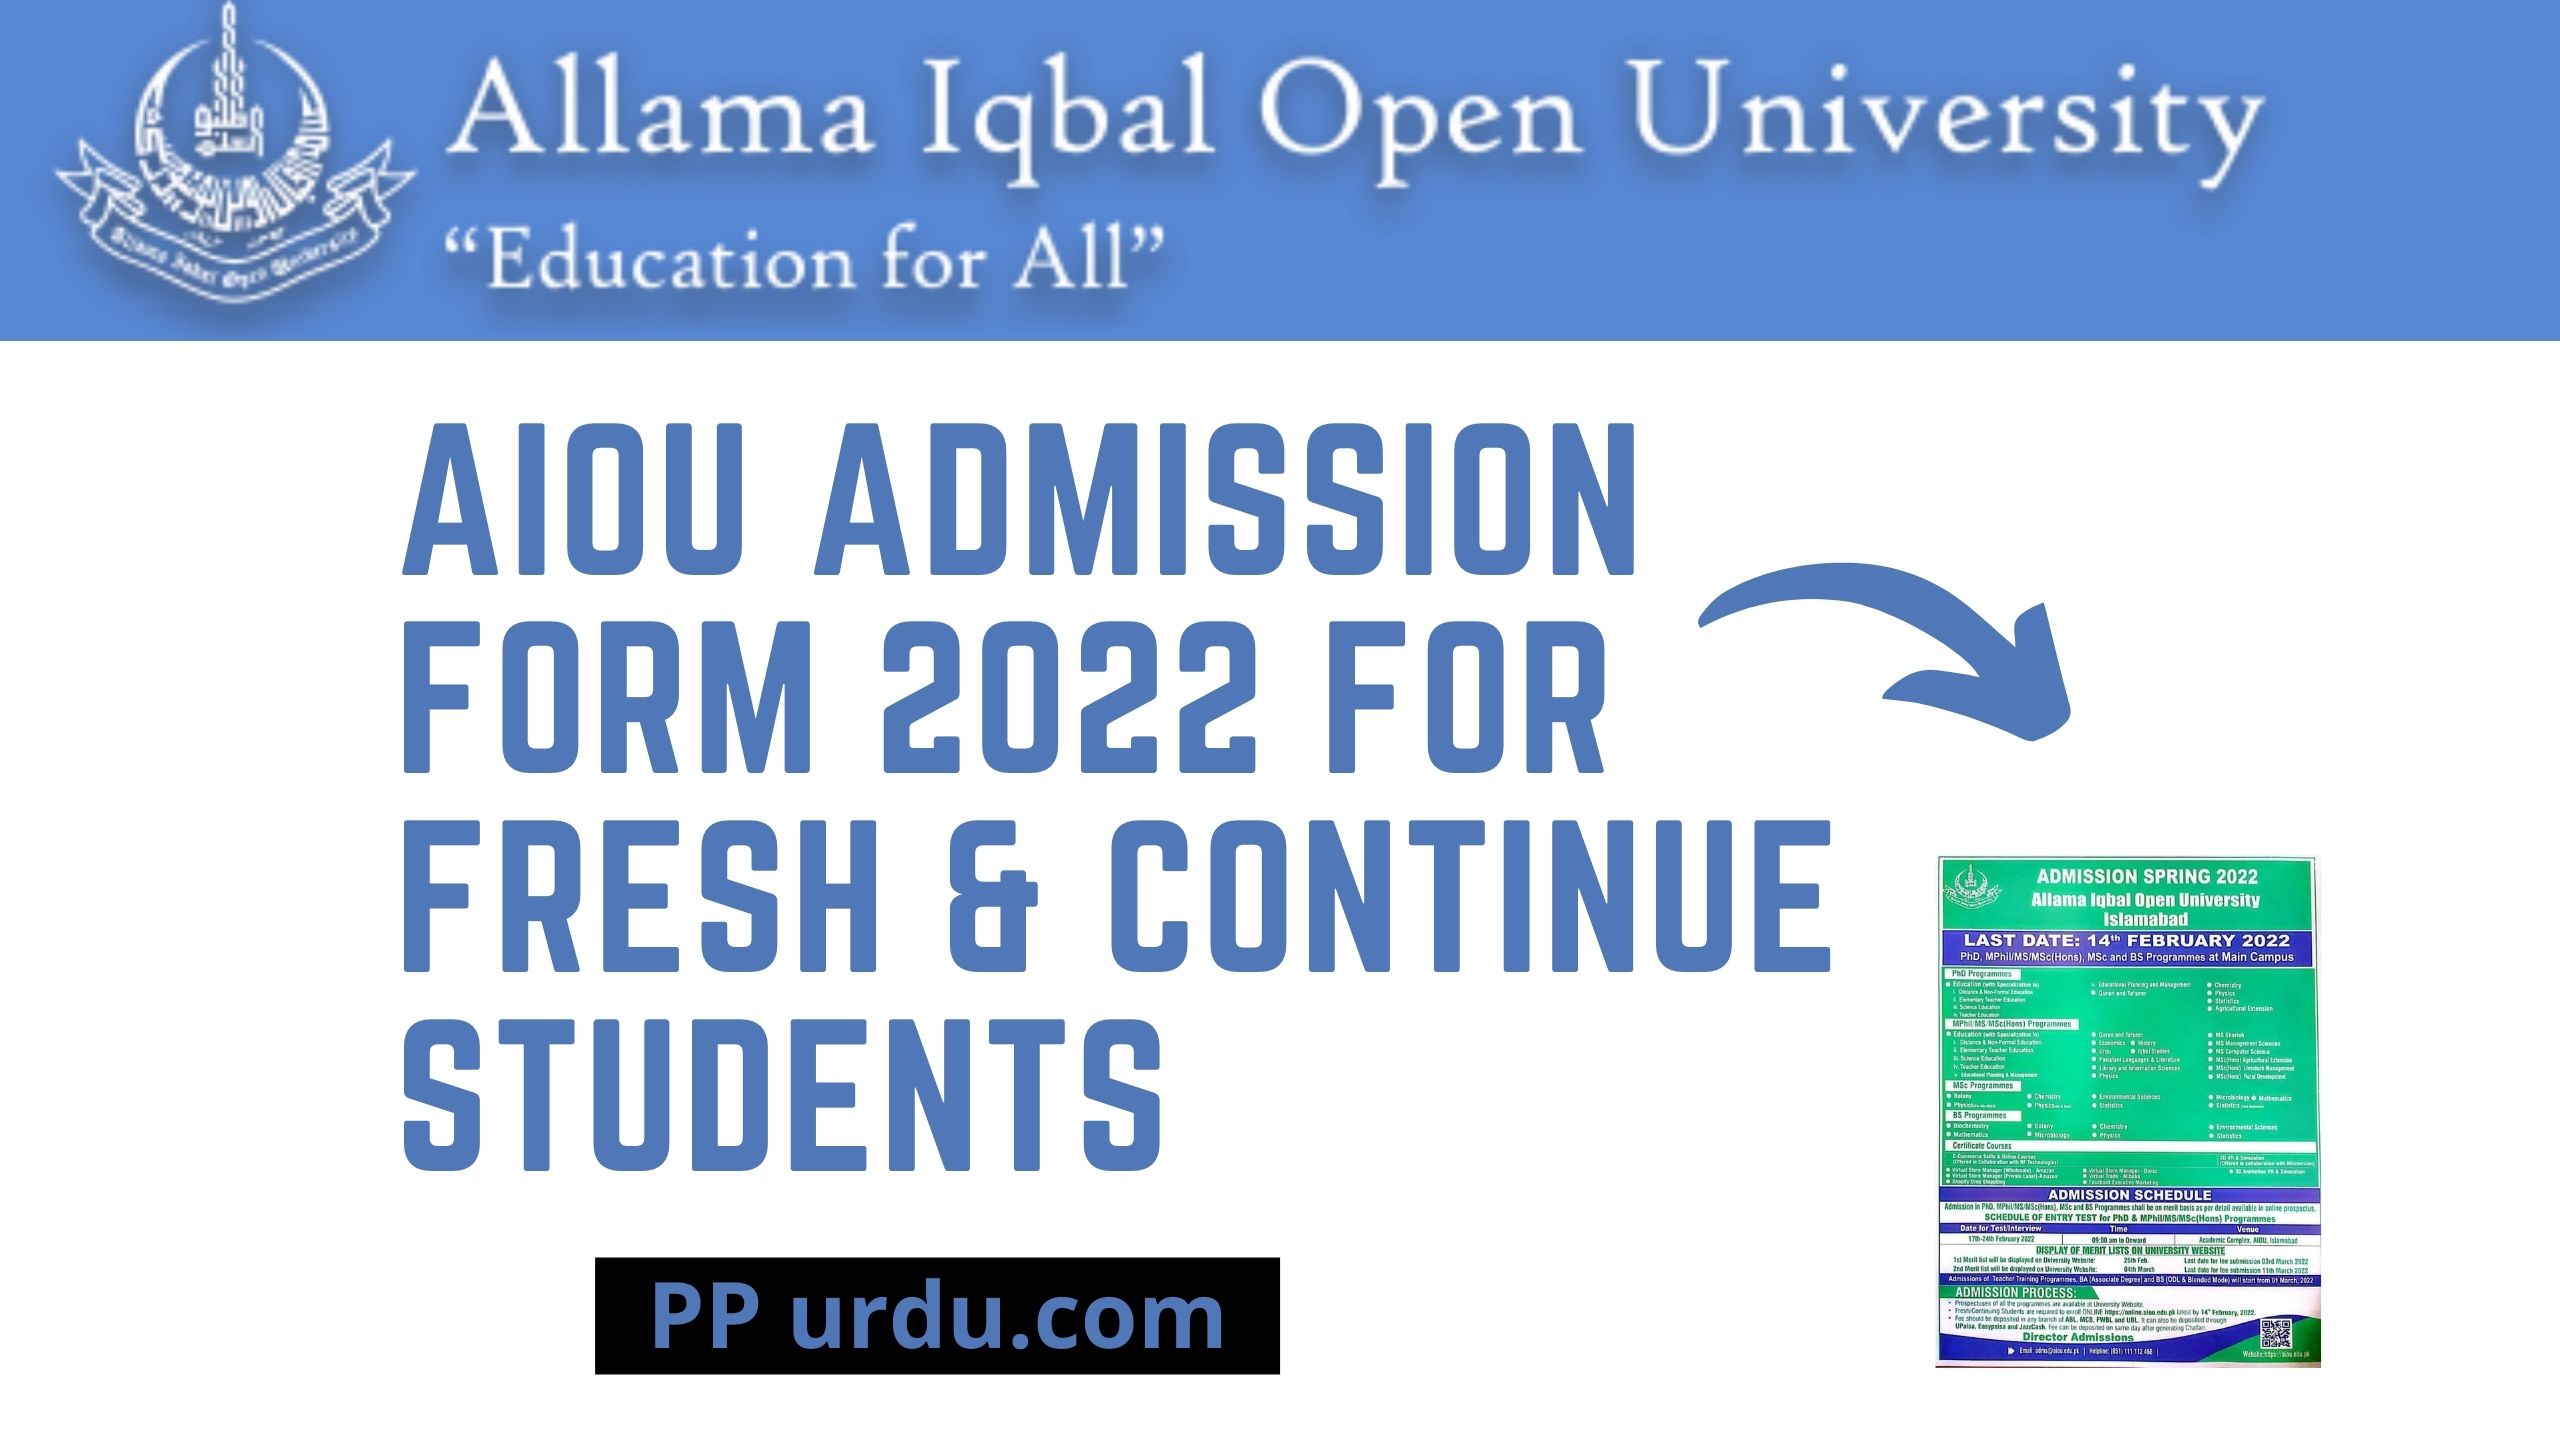 AIOU Admission Form 2022 For Fresh & Continue Students